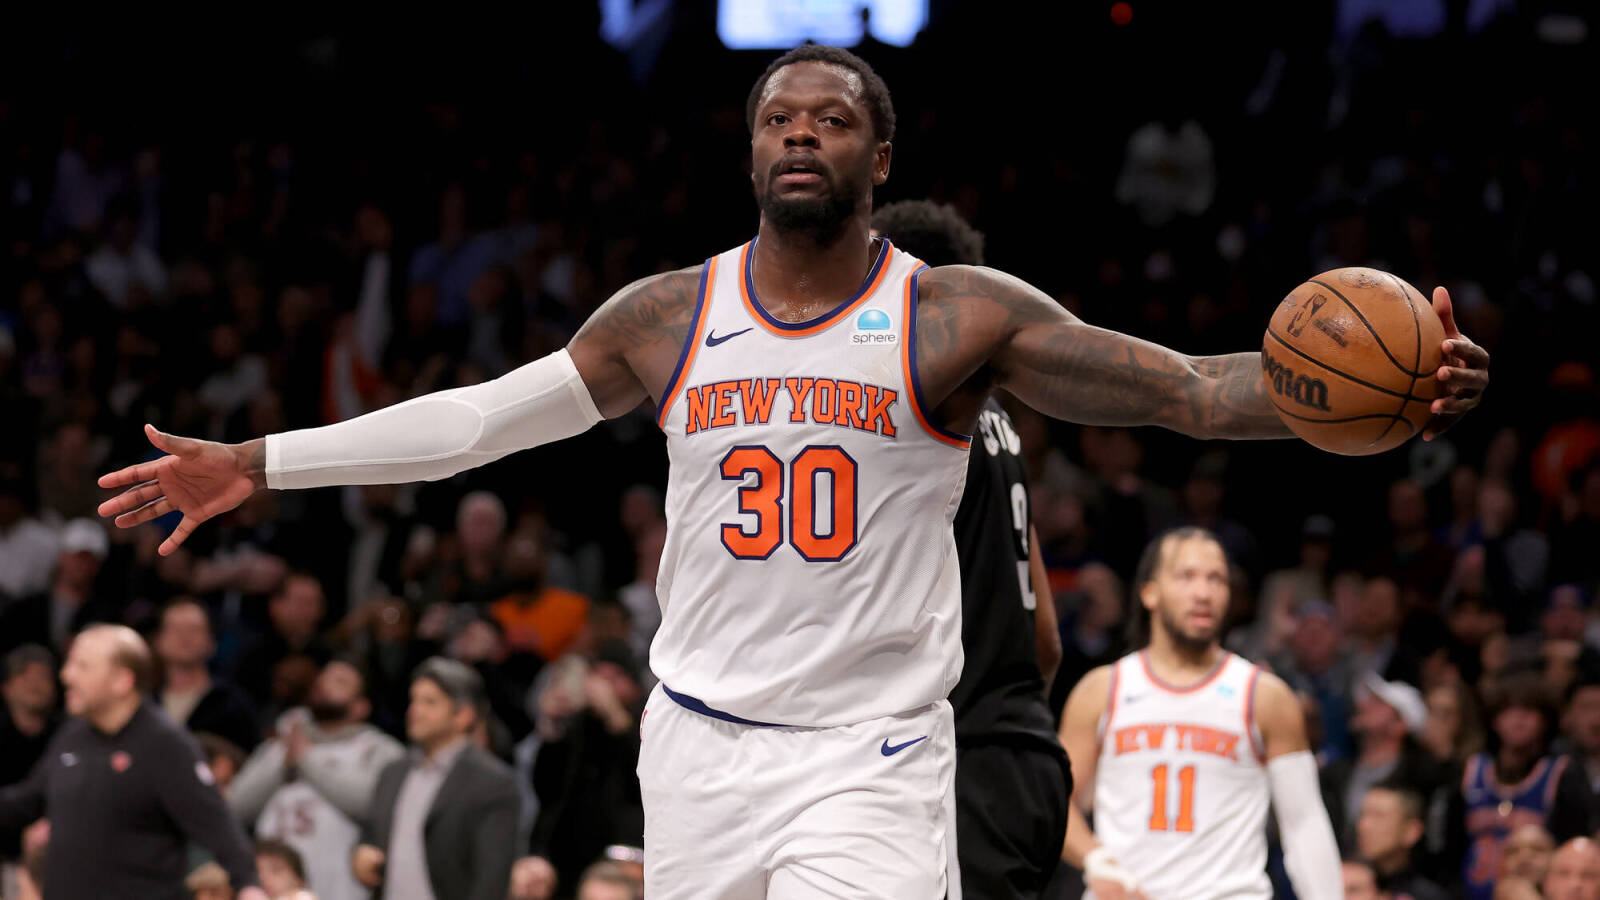 The Knicks are missing Julius Randle